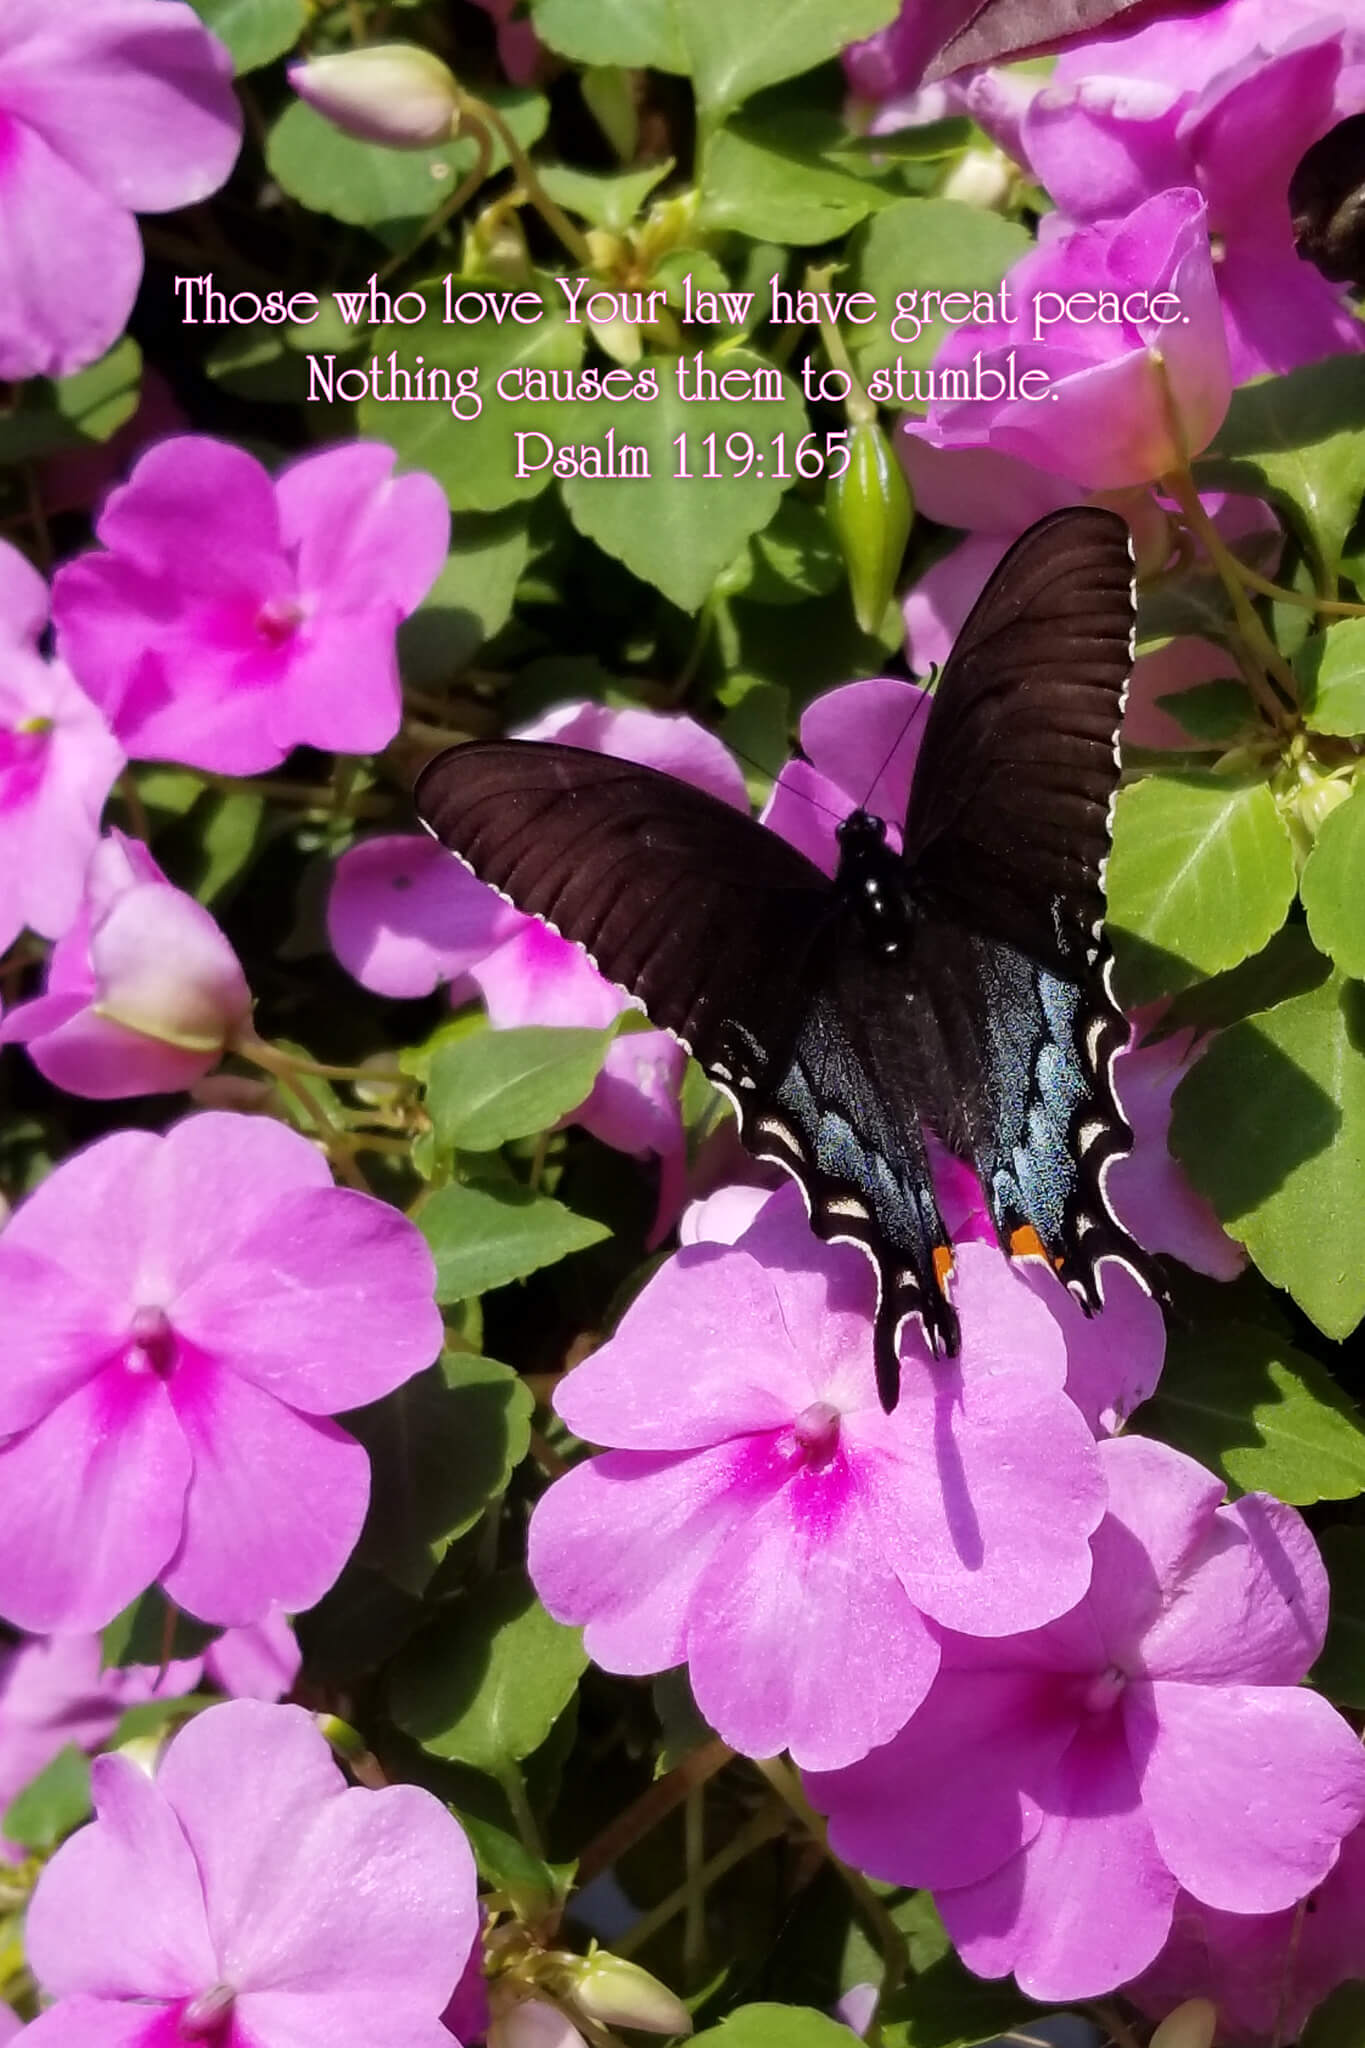 Psalm 119:165 Butterfly on Impatiens Christian greeting card